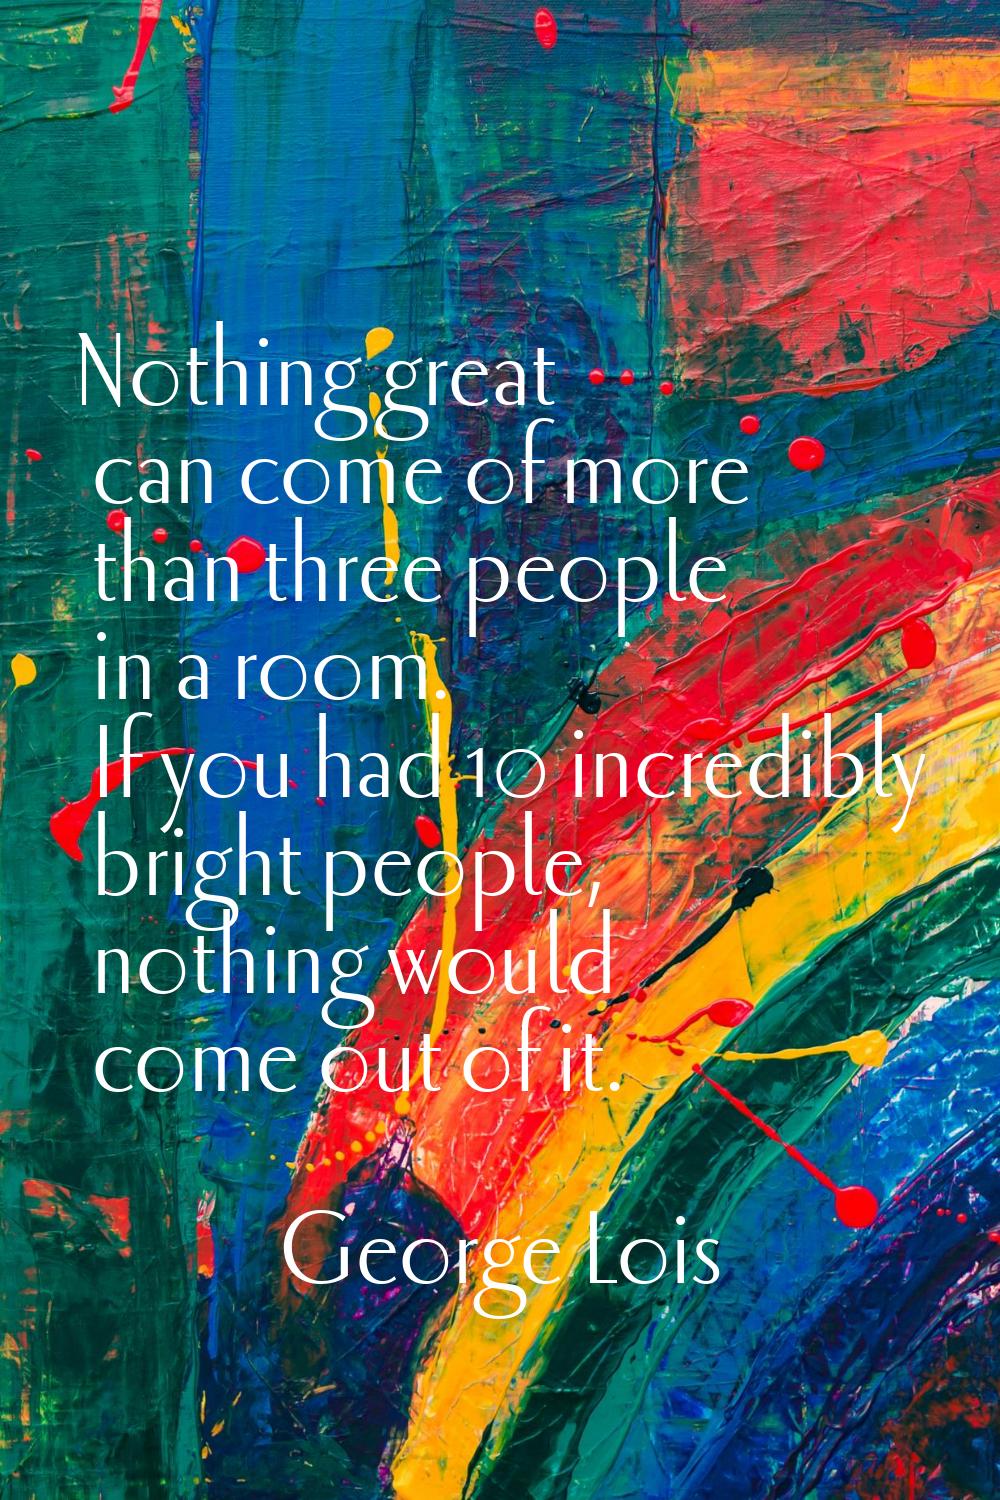 Nothing great can come of more than three people in a room. If you had 10 incredibly bright people,